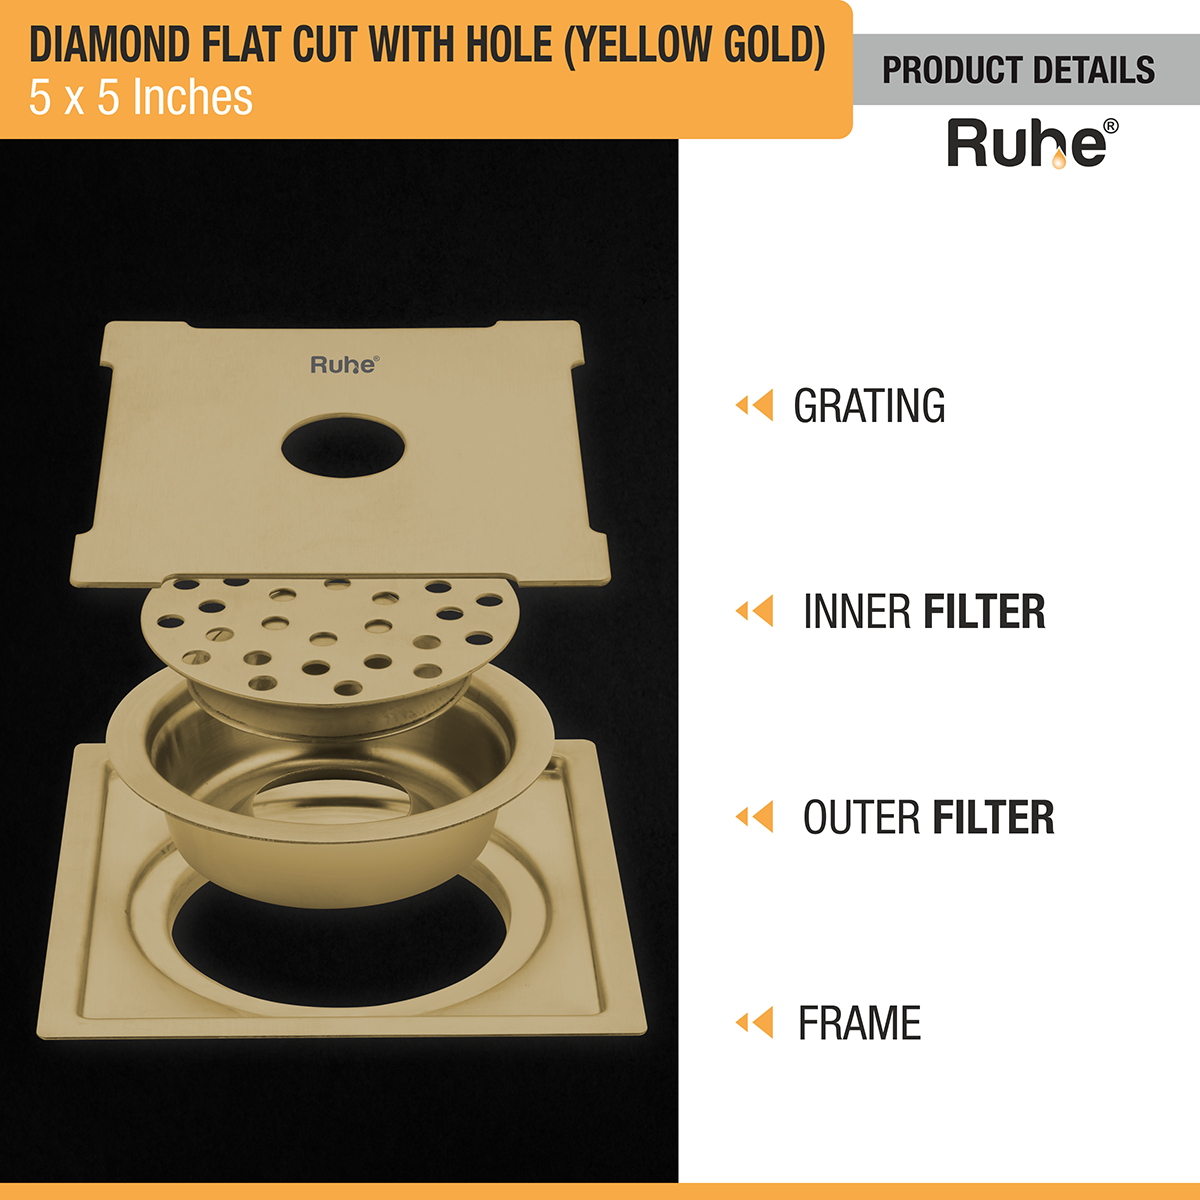 Diamond Square Flat Cut Floor Drain in Yellow Gold PVD Coating (5 x 5 Inches) with Hole product details